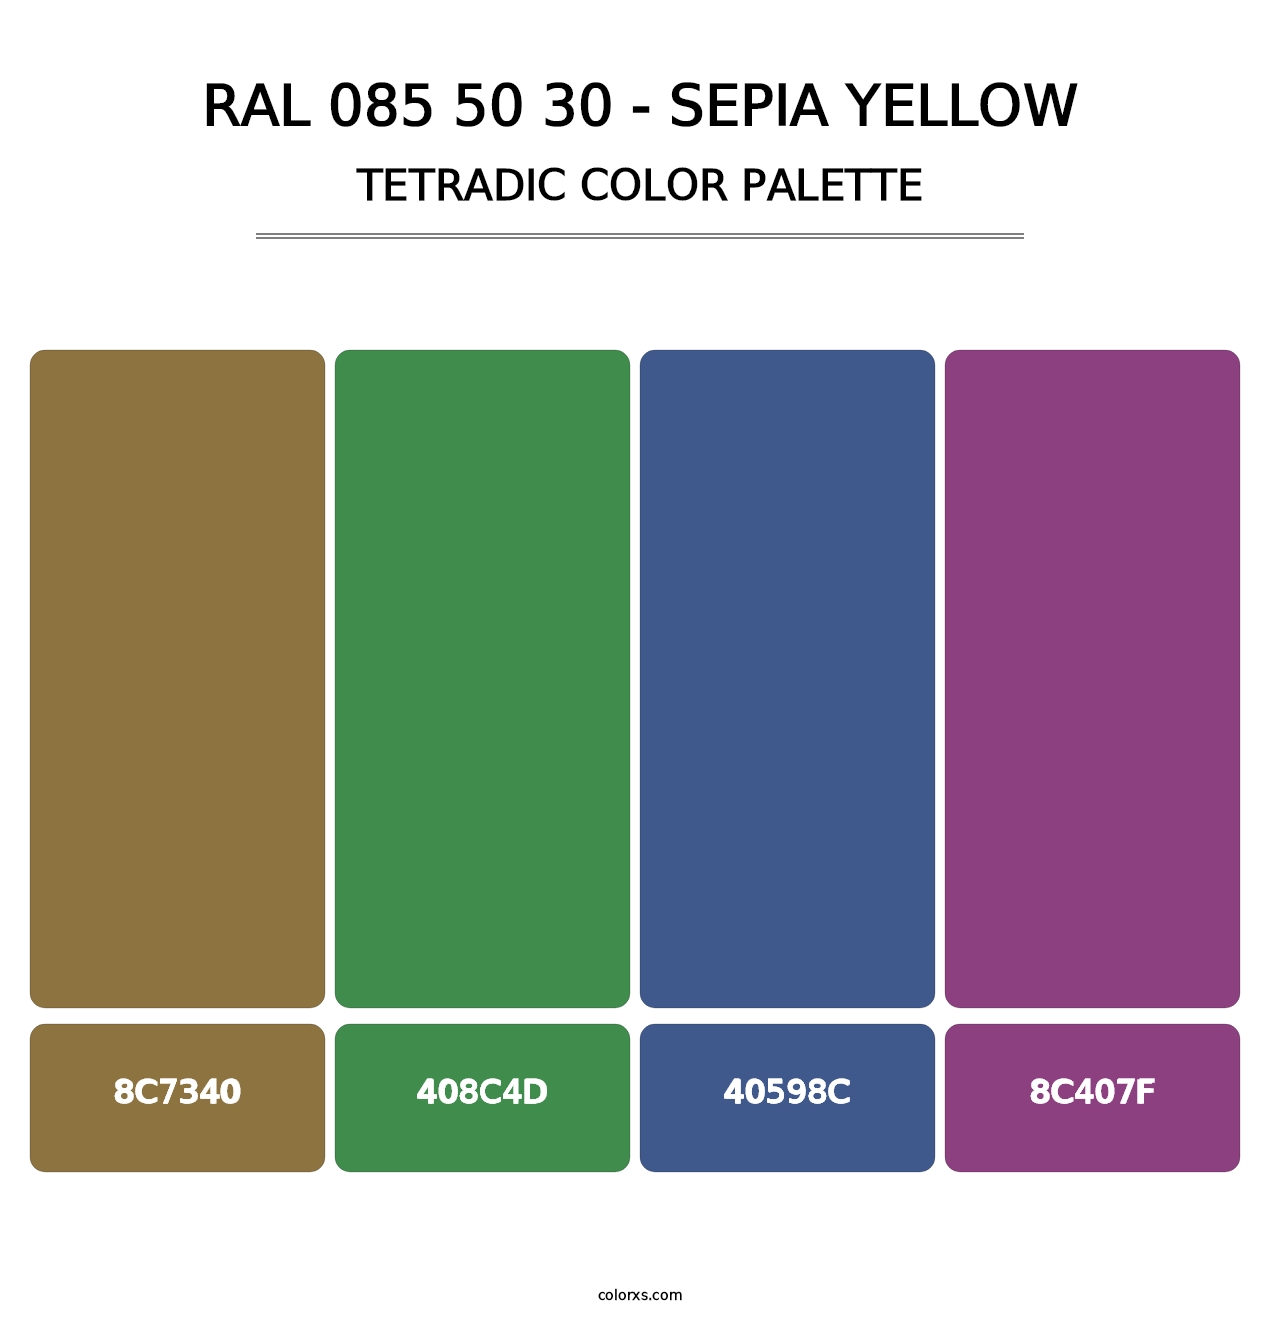 RAL 085 50 30 - Sepia Yellow - Tetradic Color Palette